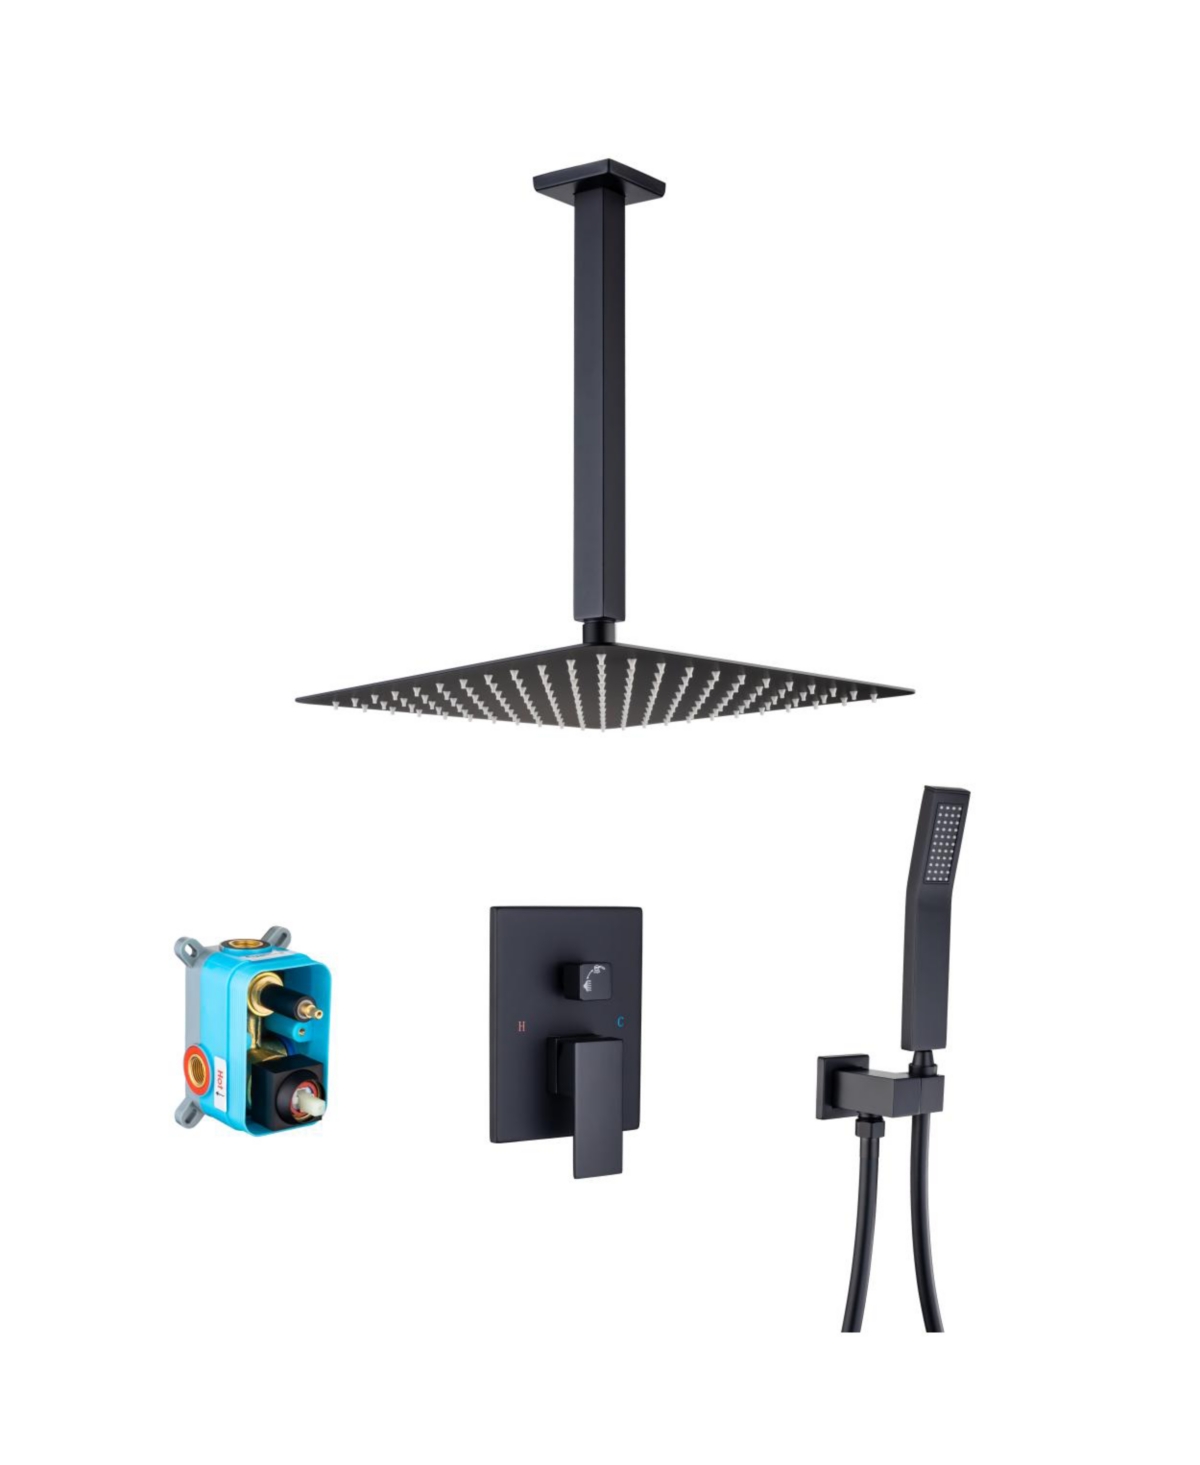 12" Brushed Nickel Ceiling Shower System with Mixer Valve - Black